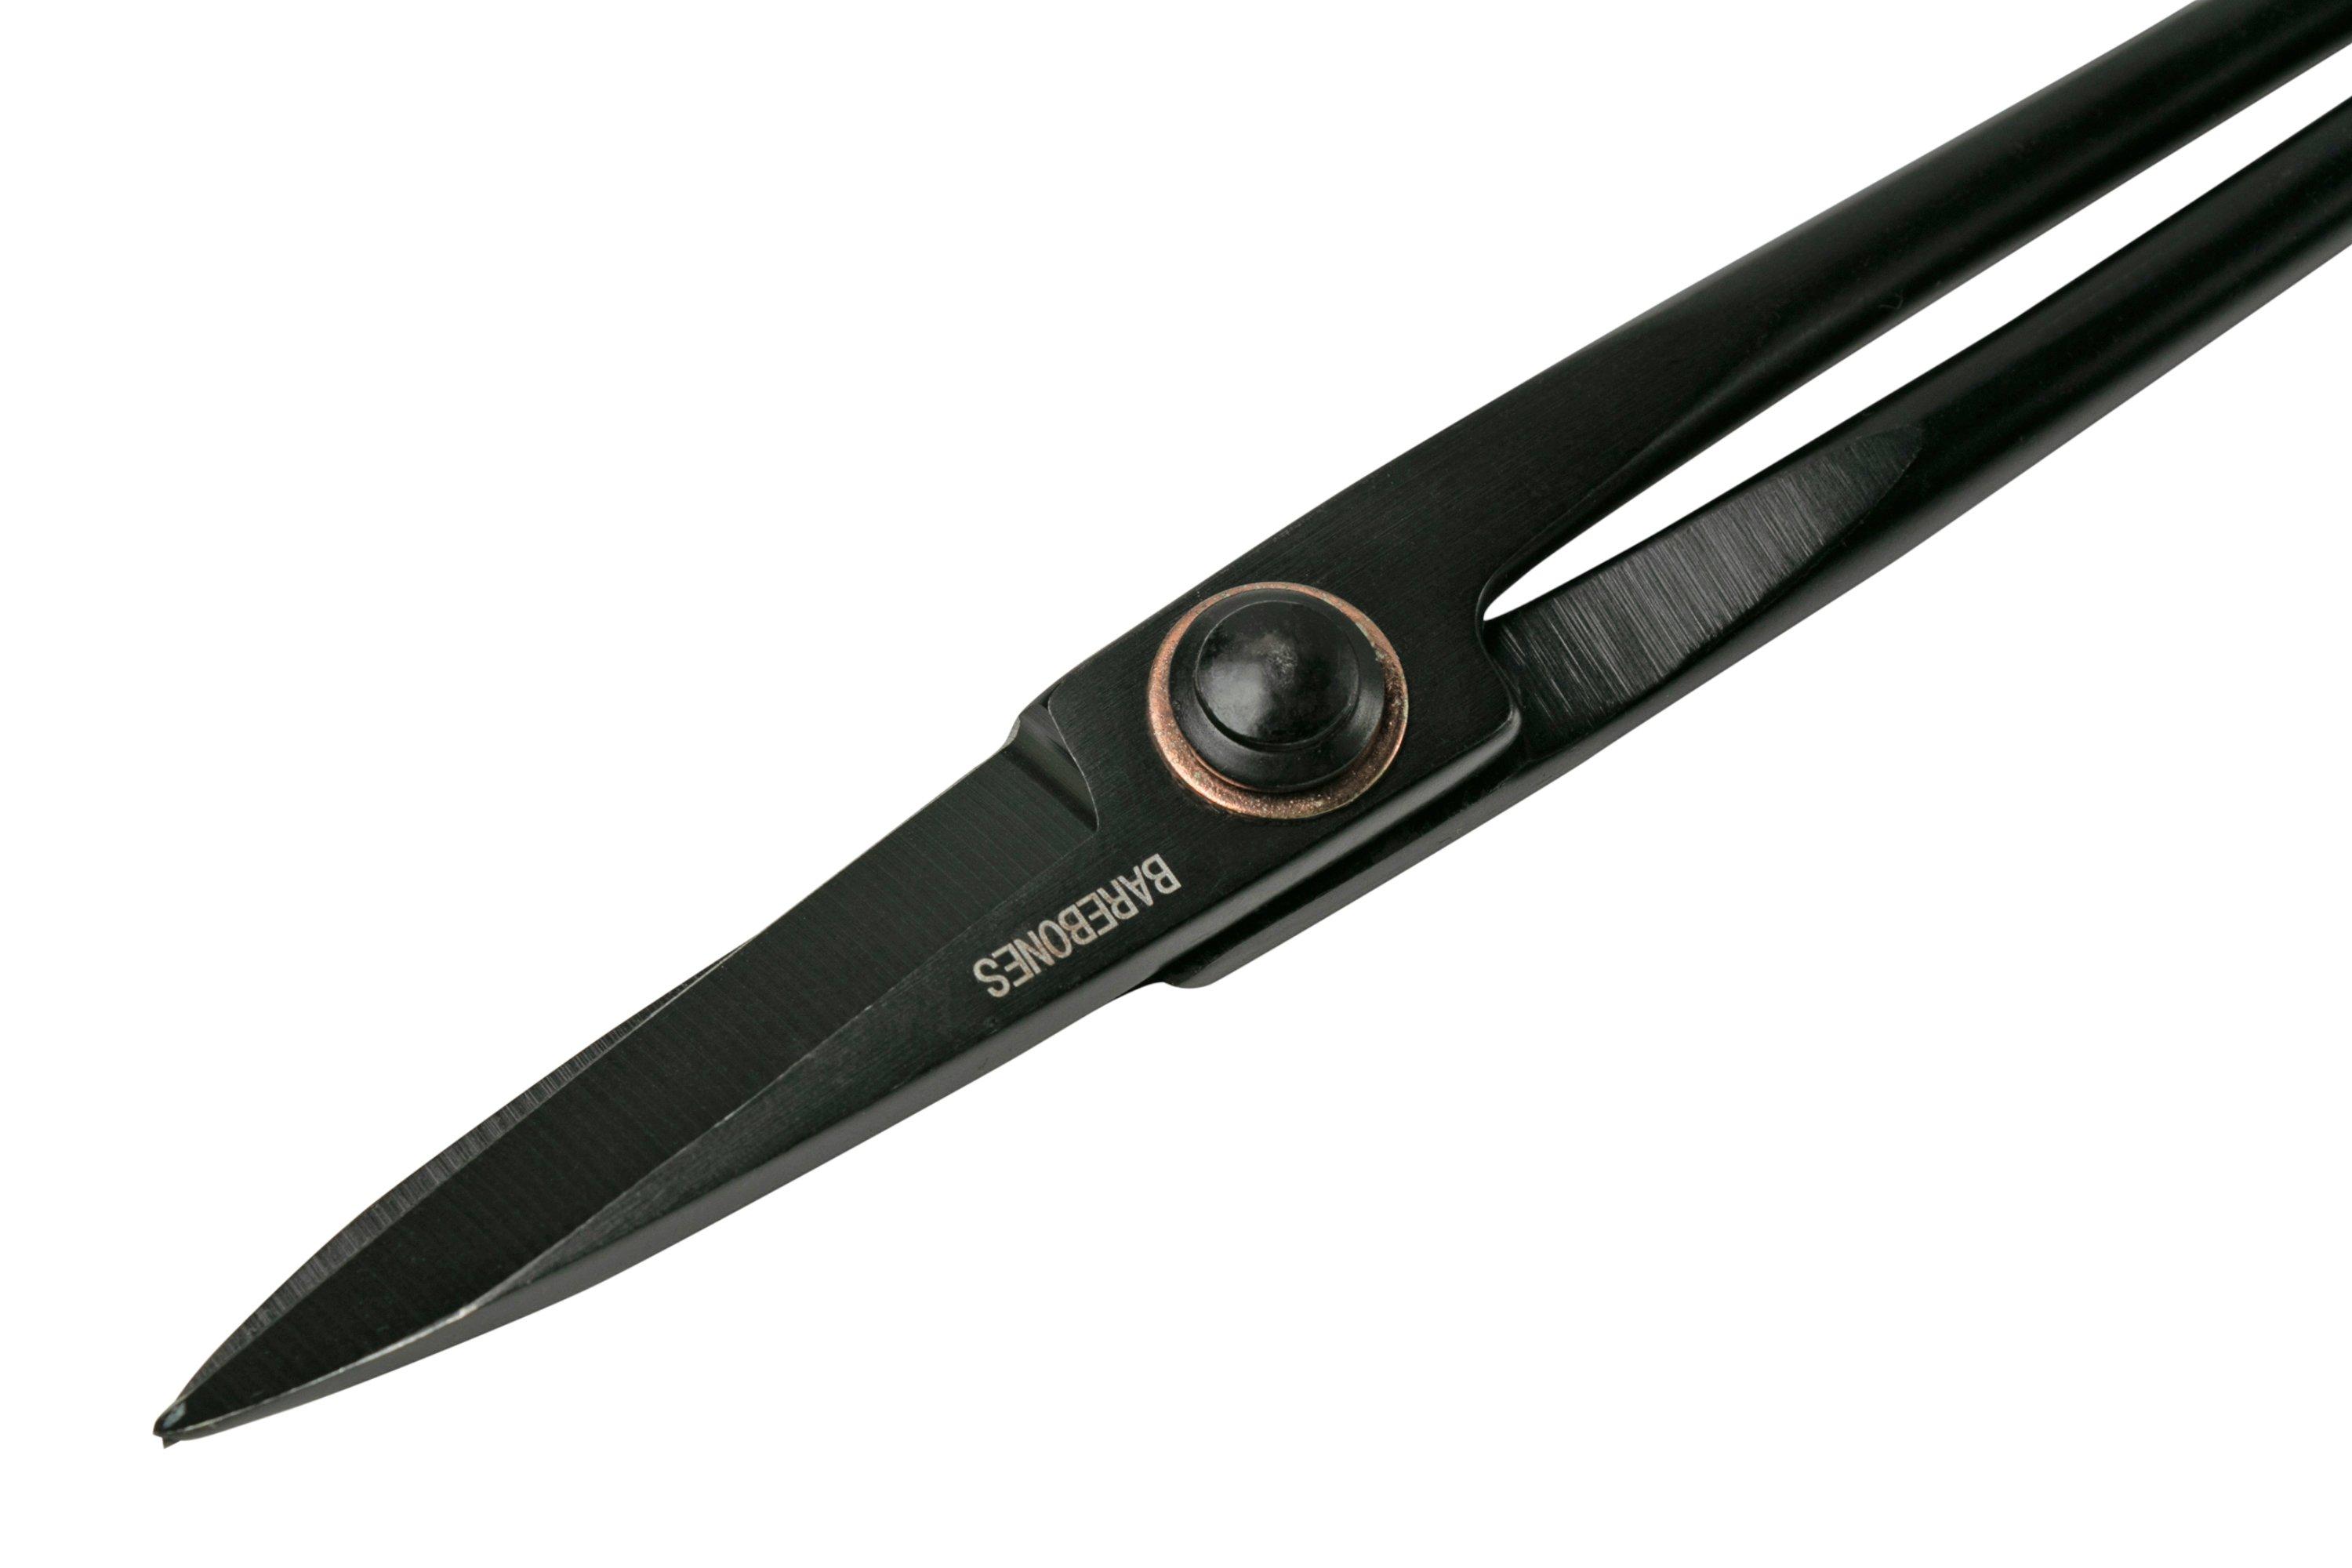 Guggenhein IX Professional Tailor Shears 9 Inch for sale online